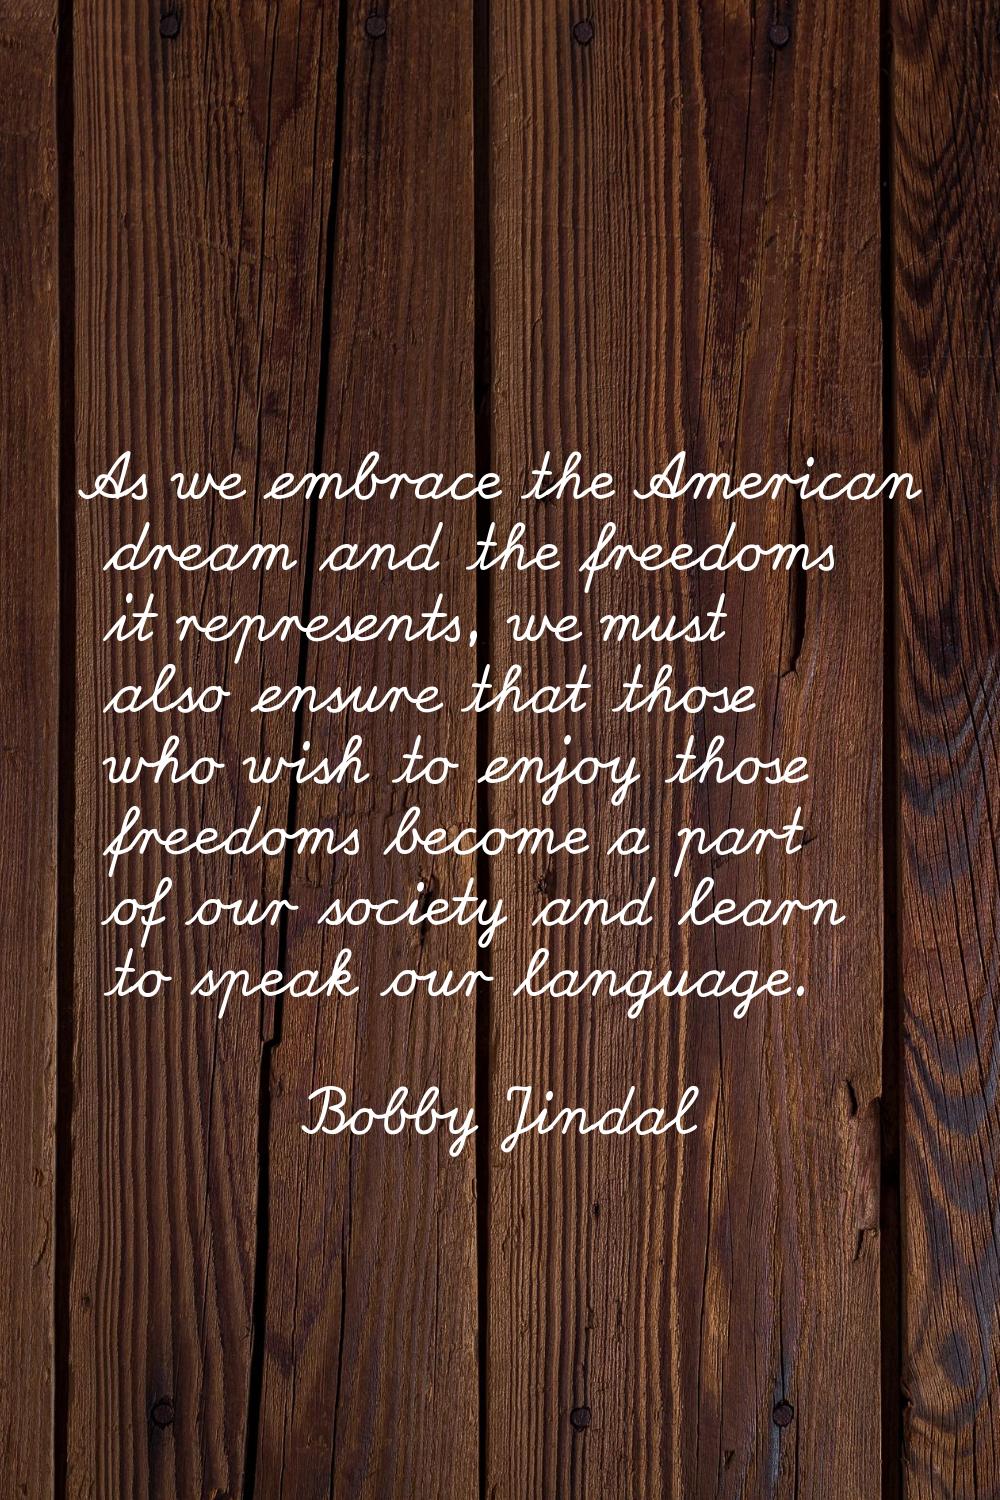 As we embrace the American dream and the freedoms it represents, we must also ensure that those who